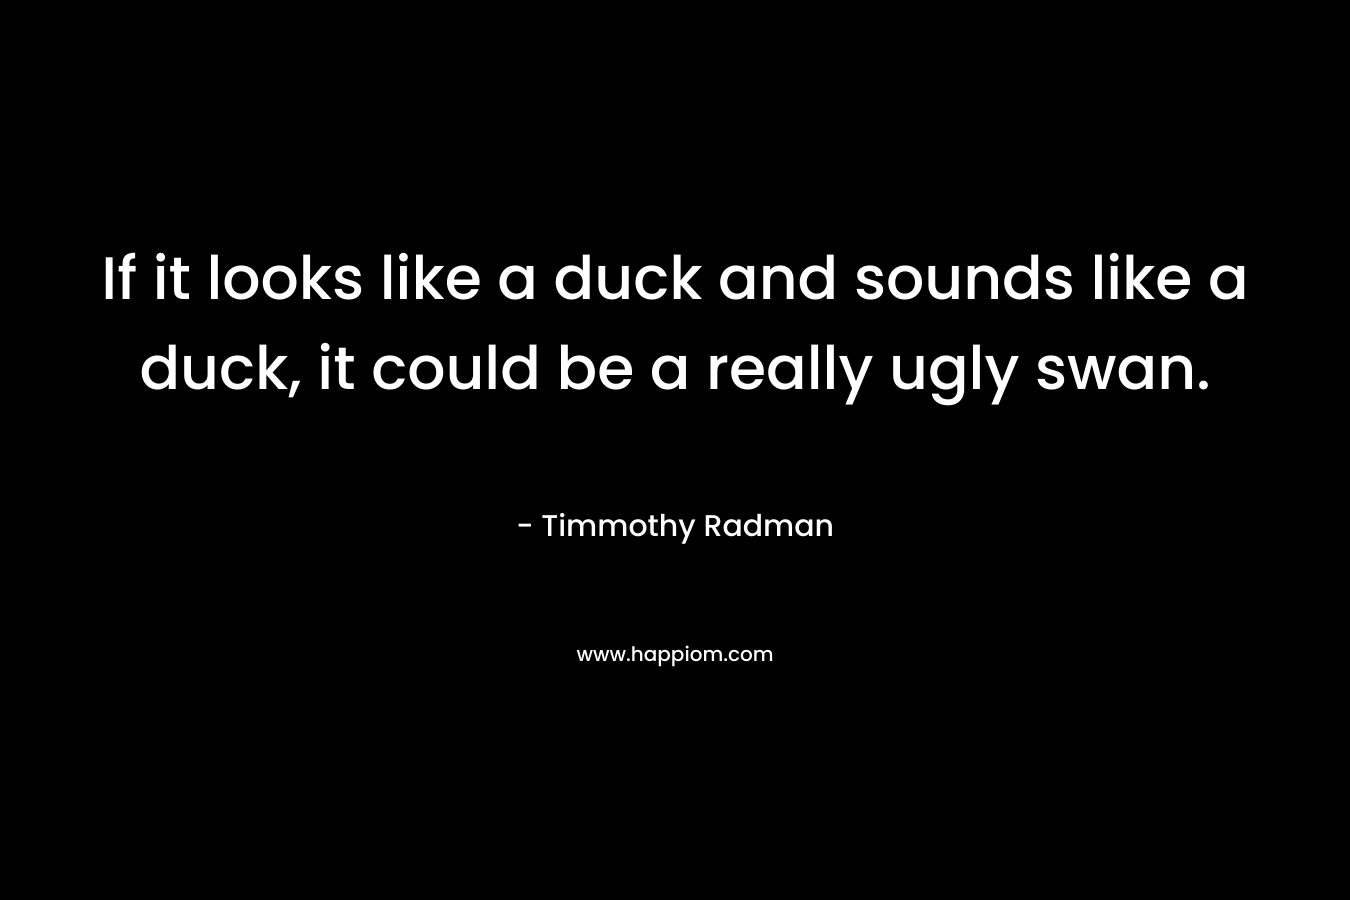 If it looks like a duck and sounds like a duck, it could be a really ugly swan.